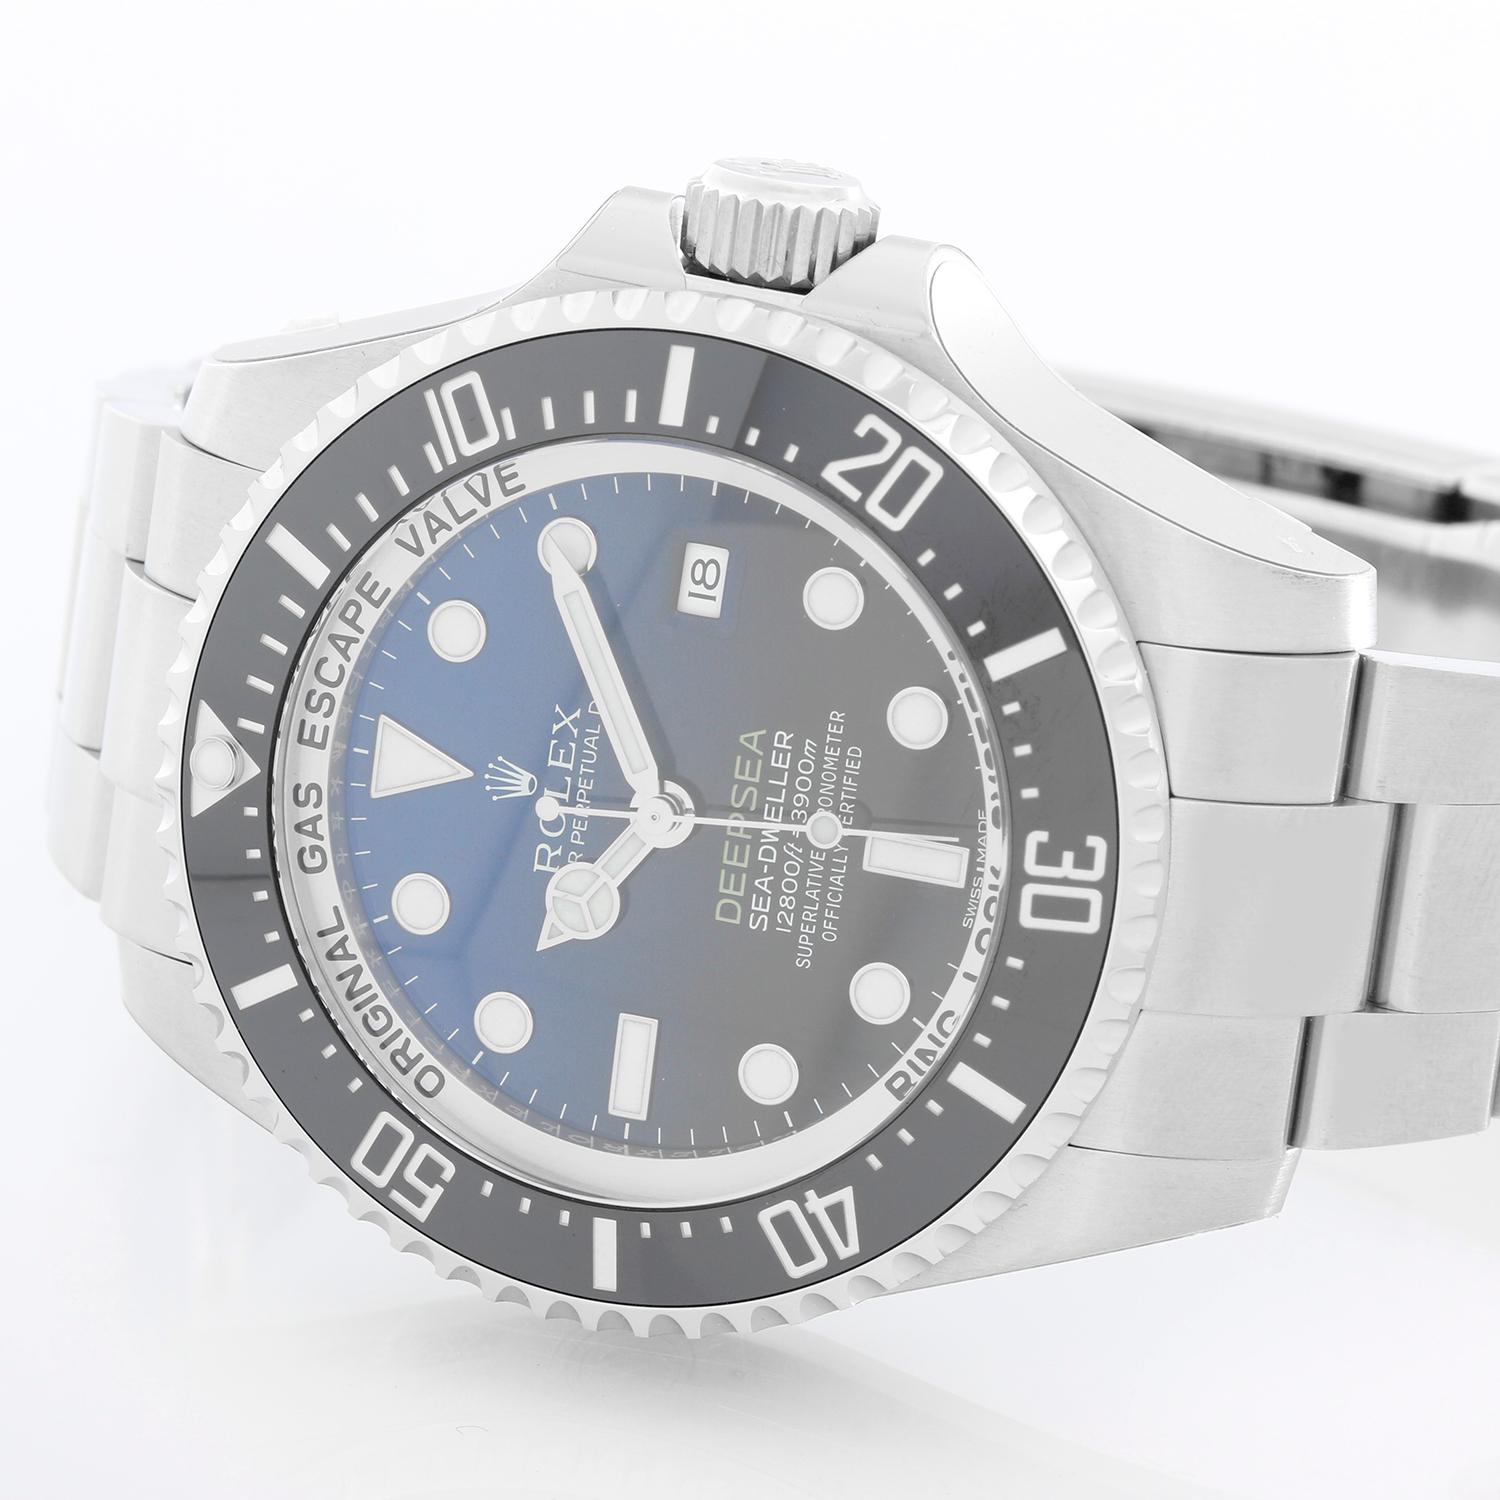 Rolex Sea Dweller-Deep Sea Blue 116660 Men's Watch James Cameron - Automatic. Stainless Steel ( 44mm ). Gradient deep blue with unidirectional rotating ceramic bezel. Oyster bracelet with glide lock and adjustable clasp. Unused  with box and papers.